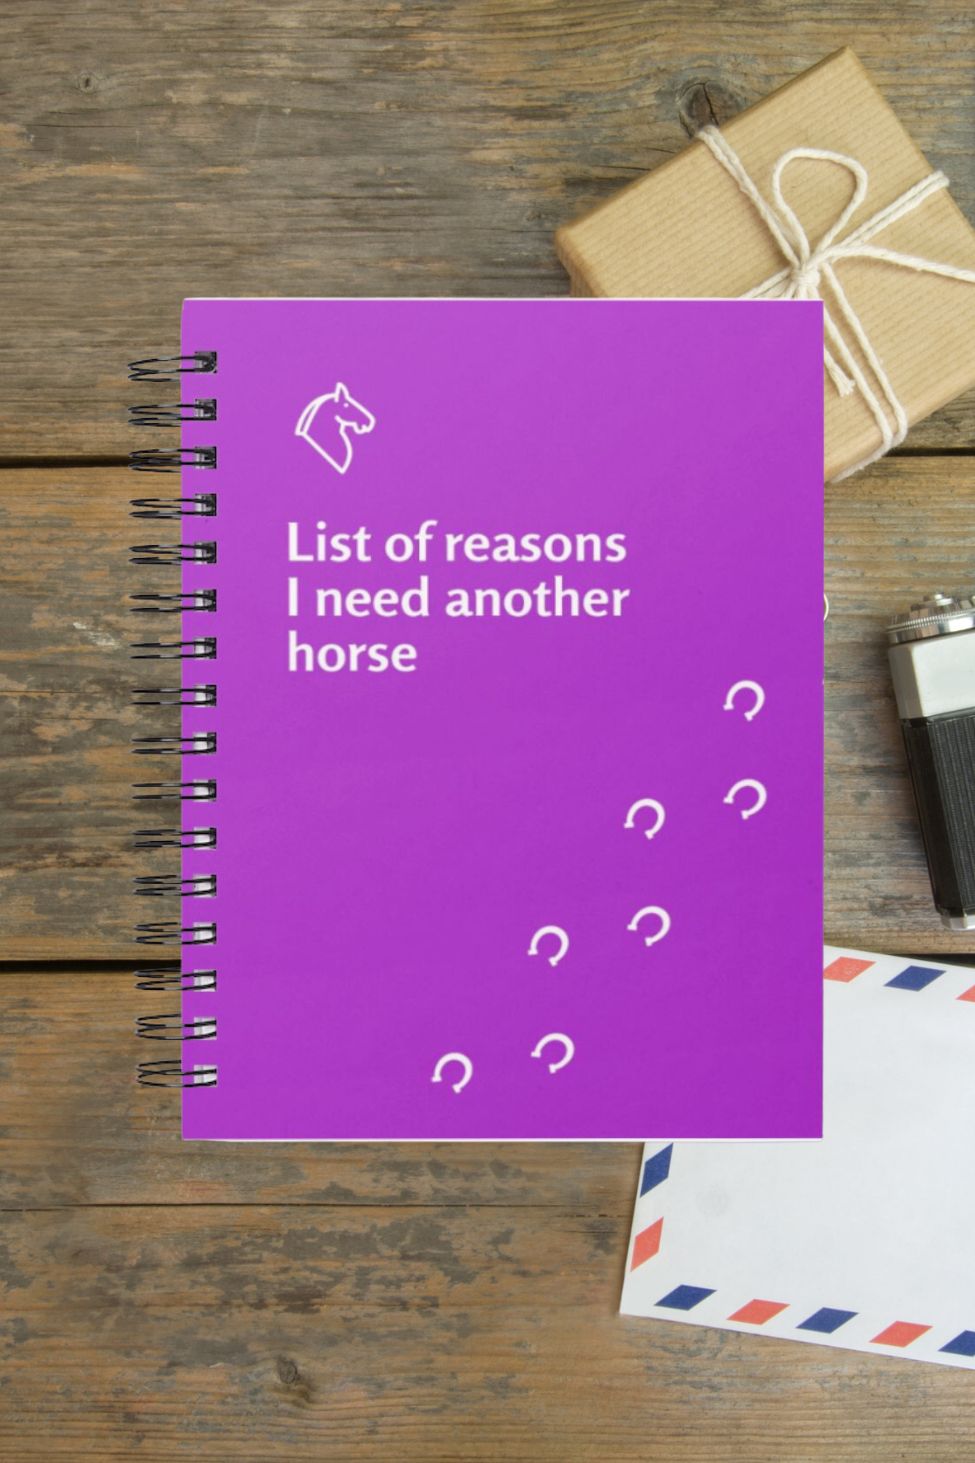 List of reasons I need another horse - Spiral bound lined notebook